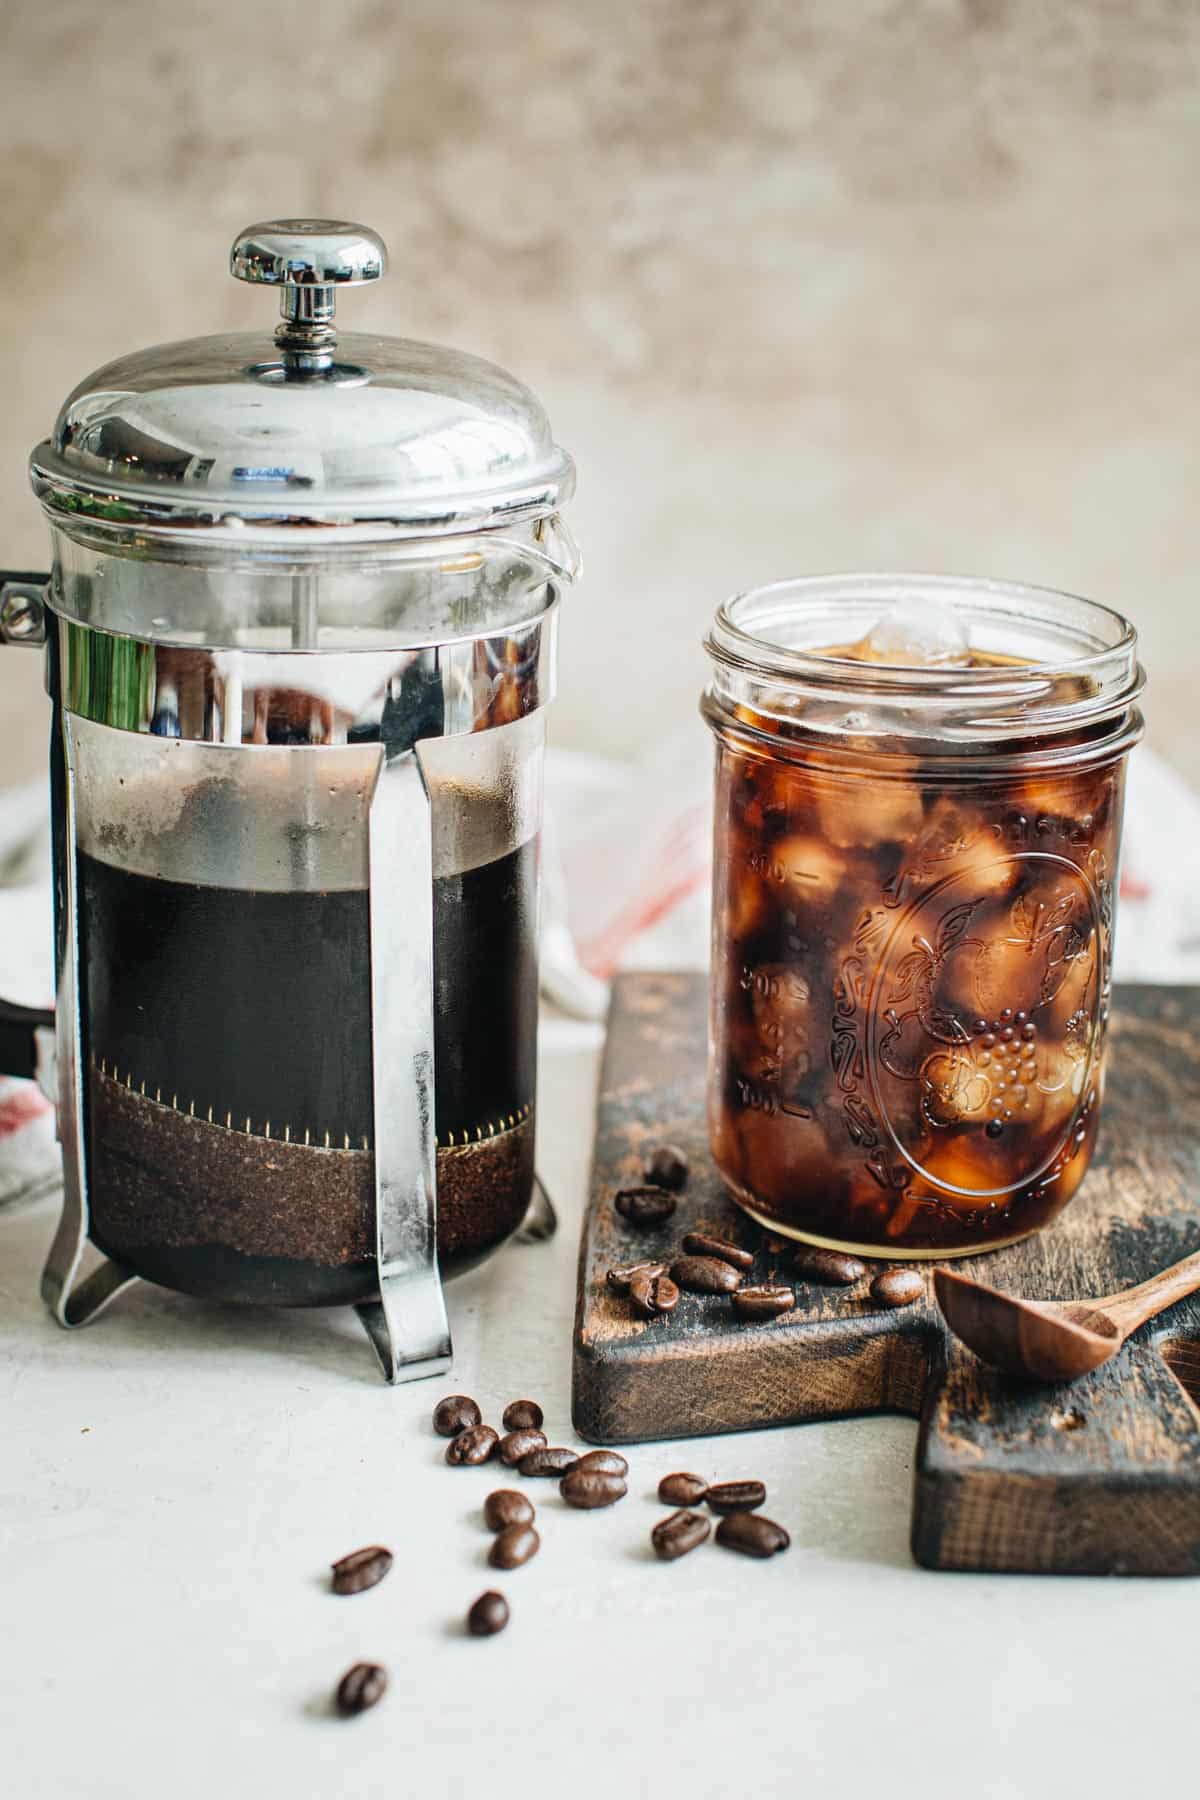 Cold brew in the French press and in a glass over ice.